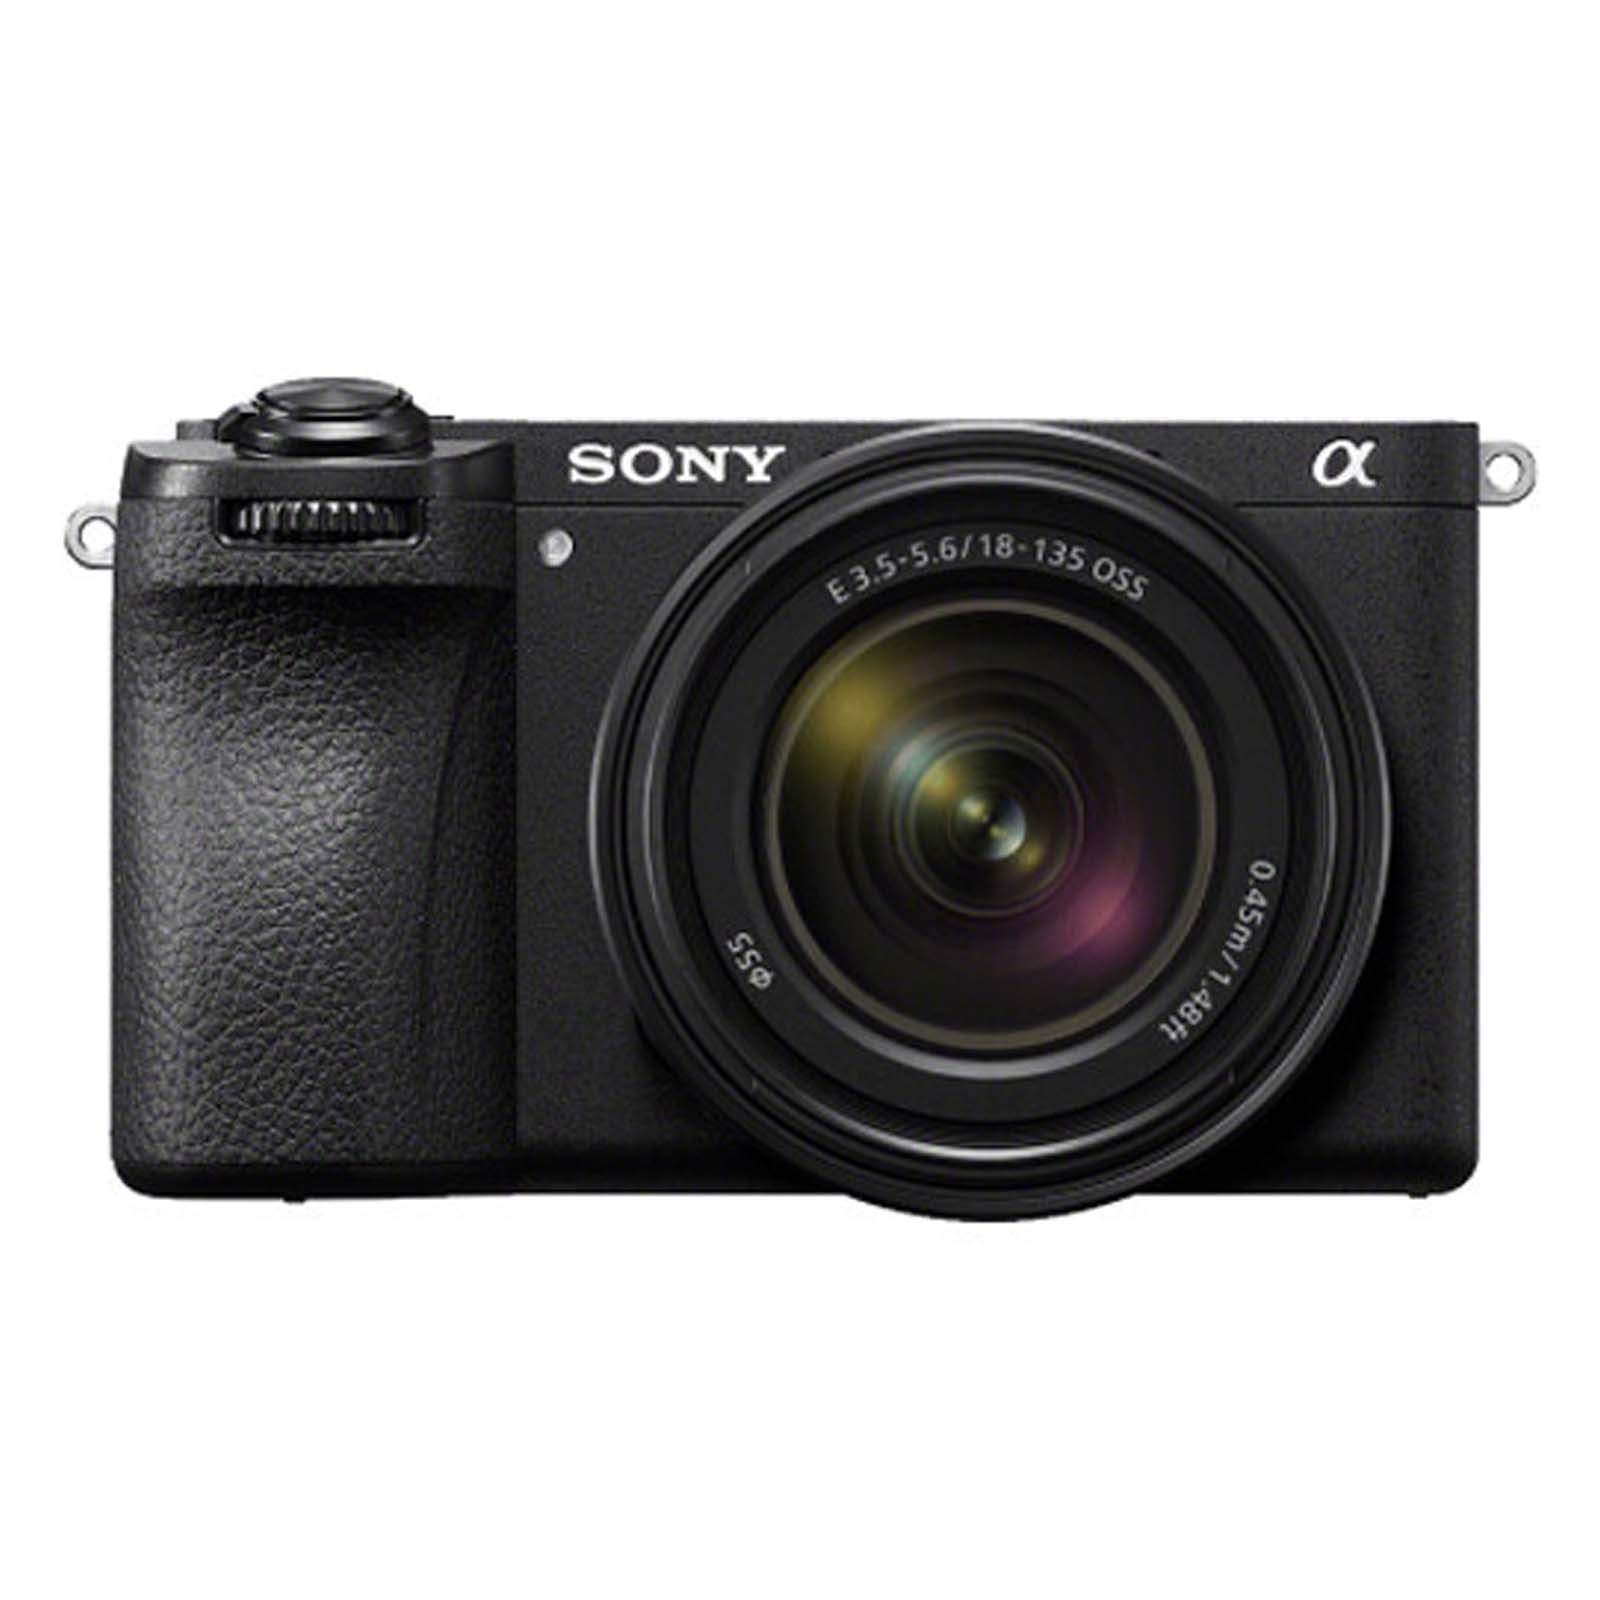 Image of Sony A6700 Digital Camera Body with 18135mm f3556 OSS Lens